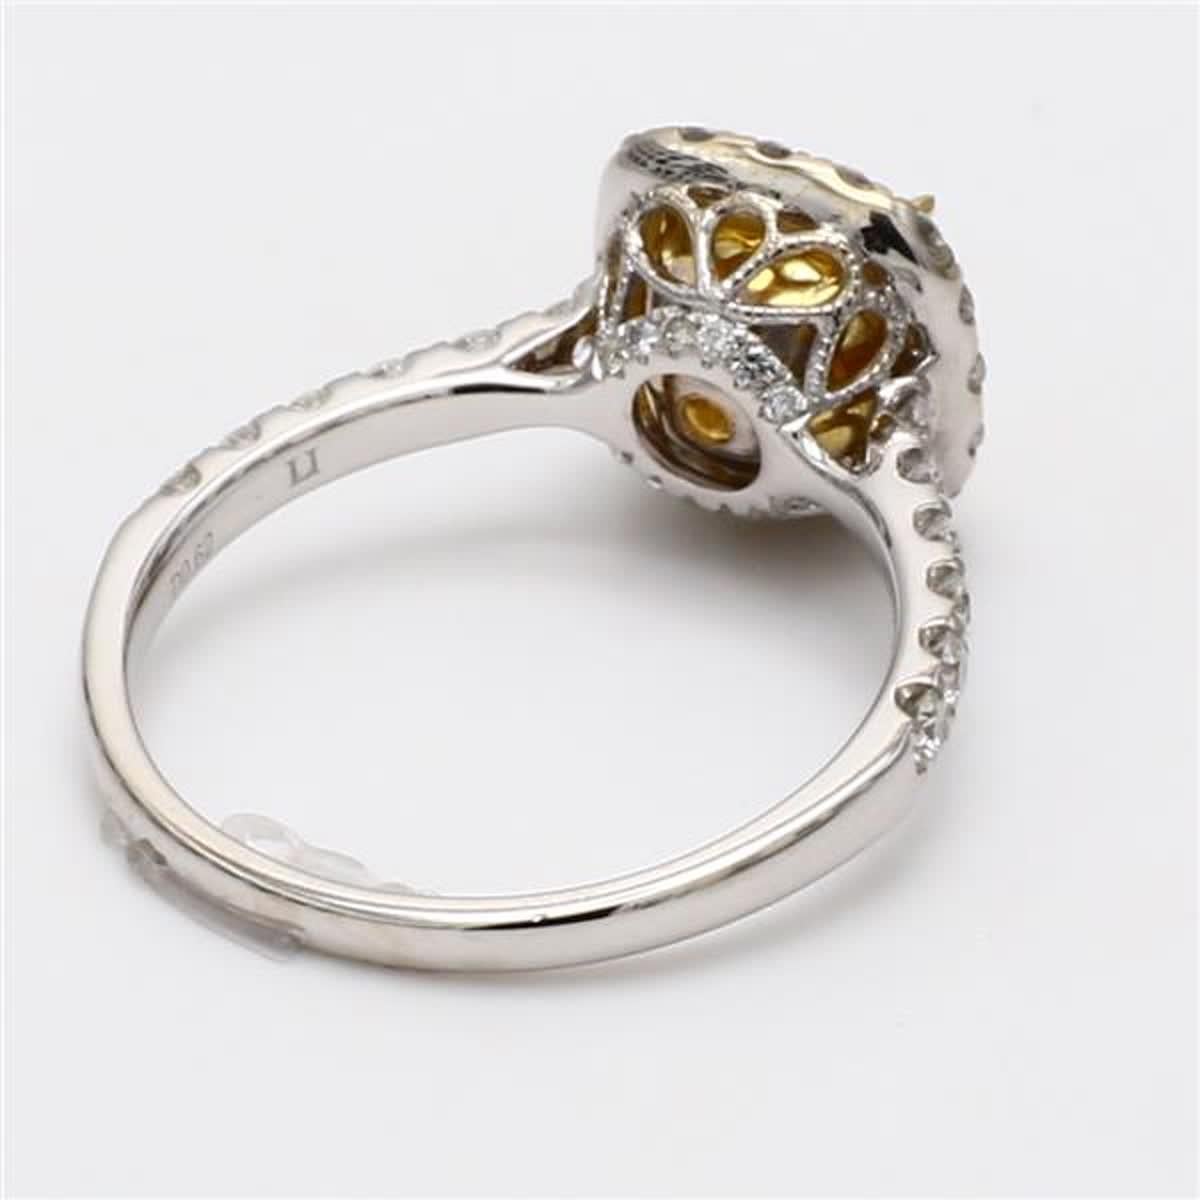 Contemporary GIA Certified Natural Yellow Cushion and White Diamond 2.14 Carat TW Gold Ring